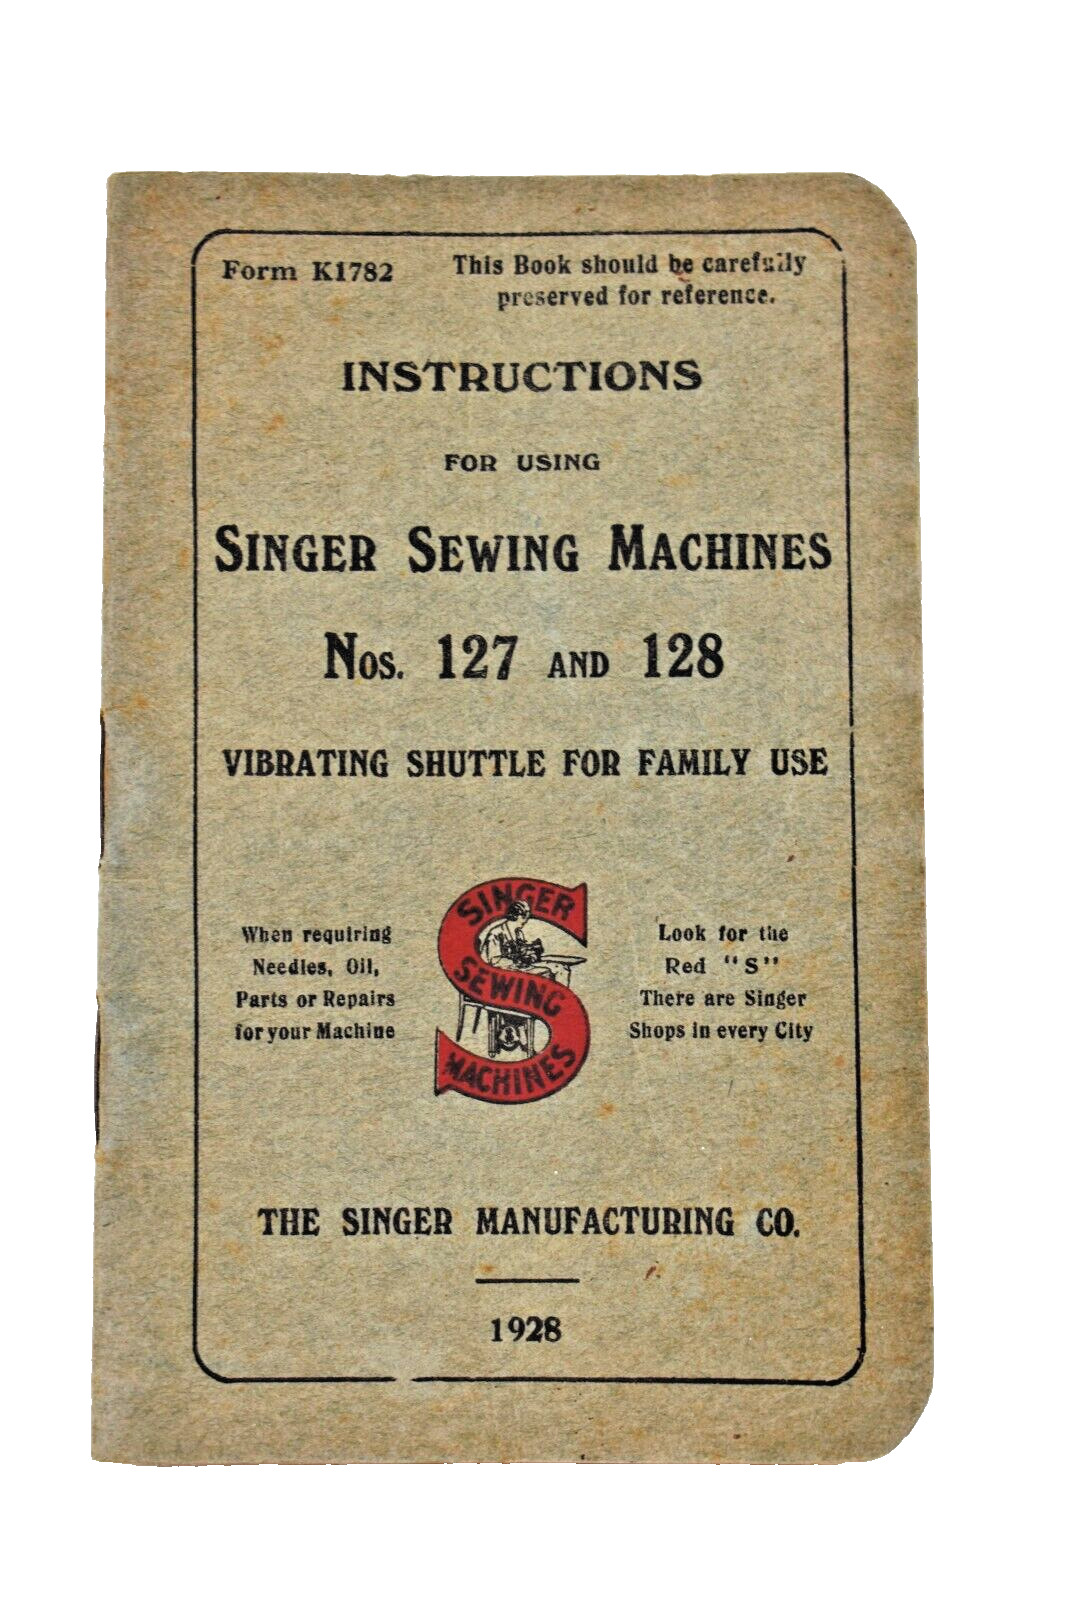 Vintage Singer Sewing Machines Instructions Use Book For Nos. 127 & 128 Cir 1928